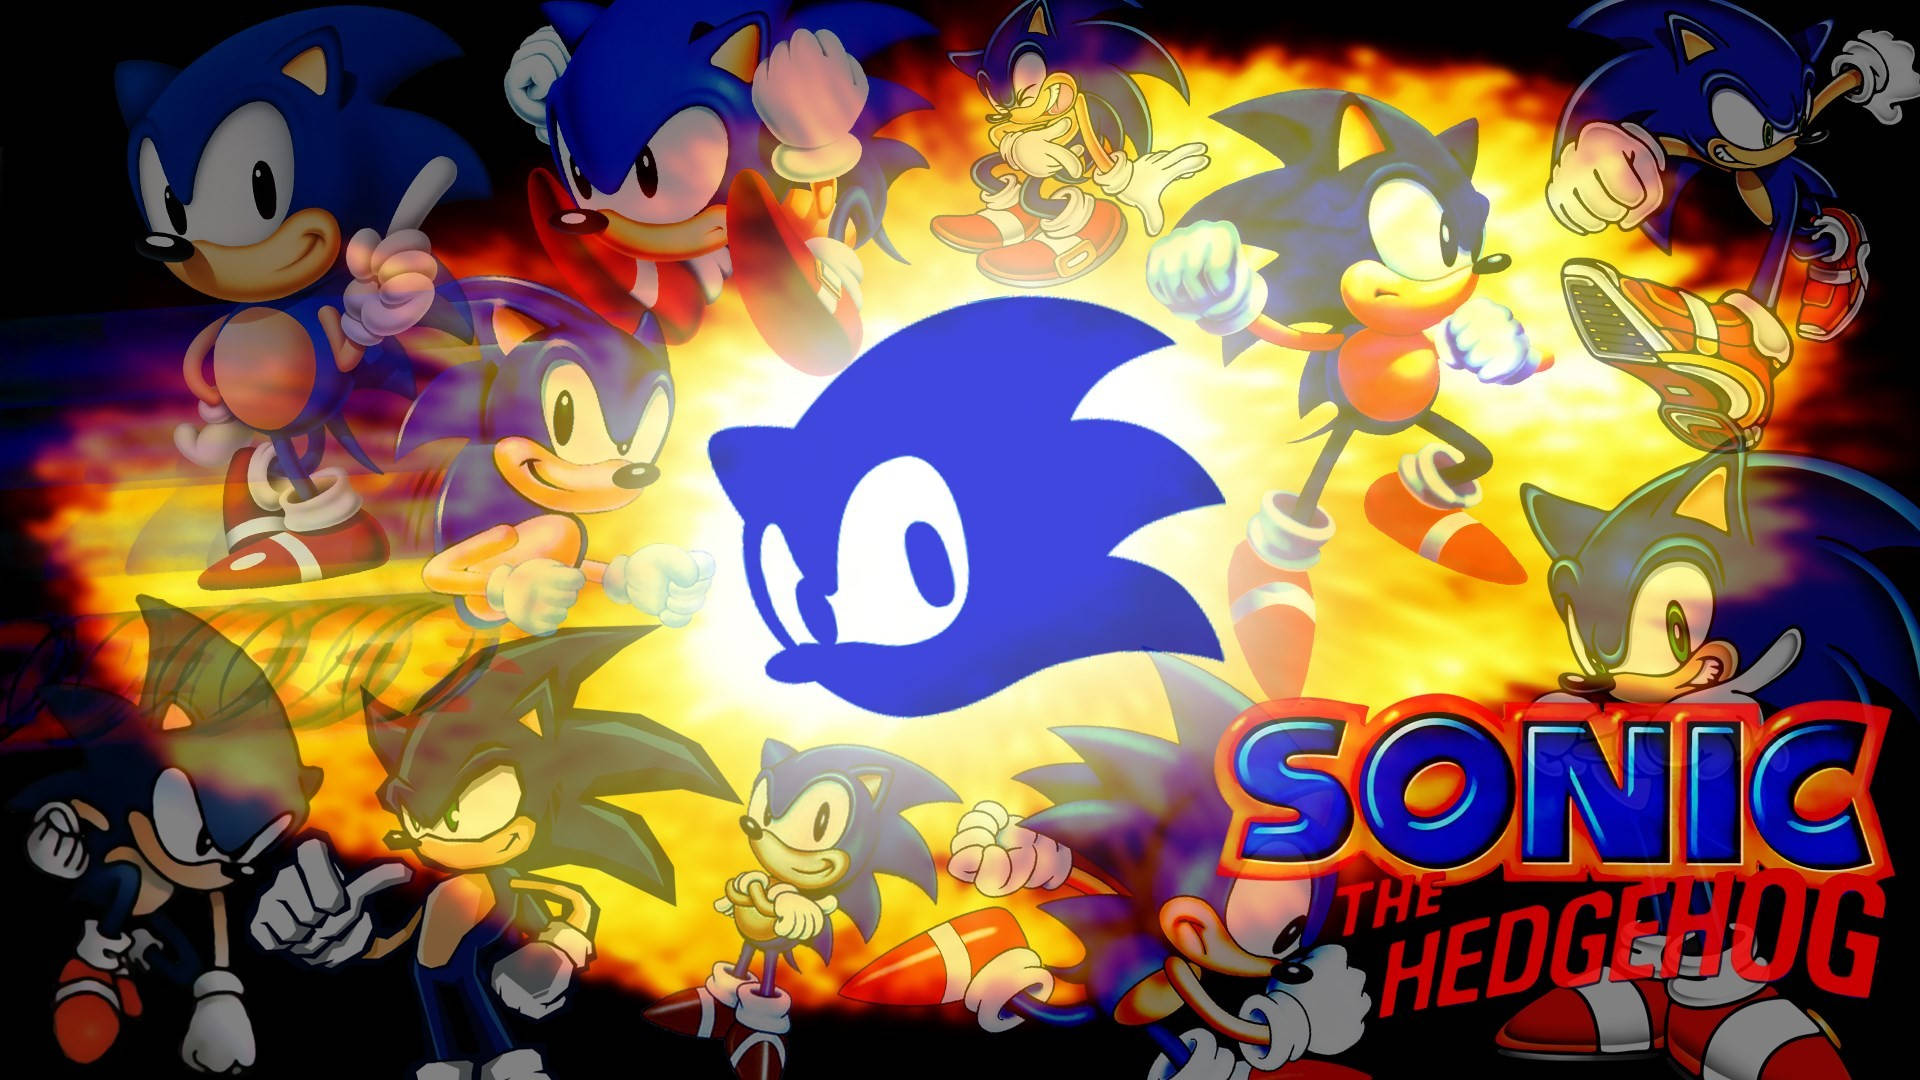 Cool Sonic Is Here to Take on All Adventures Wallpaper